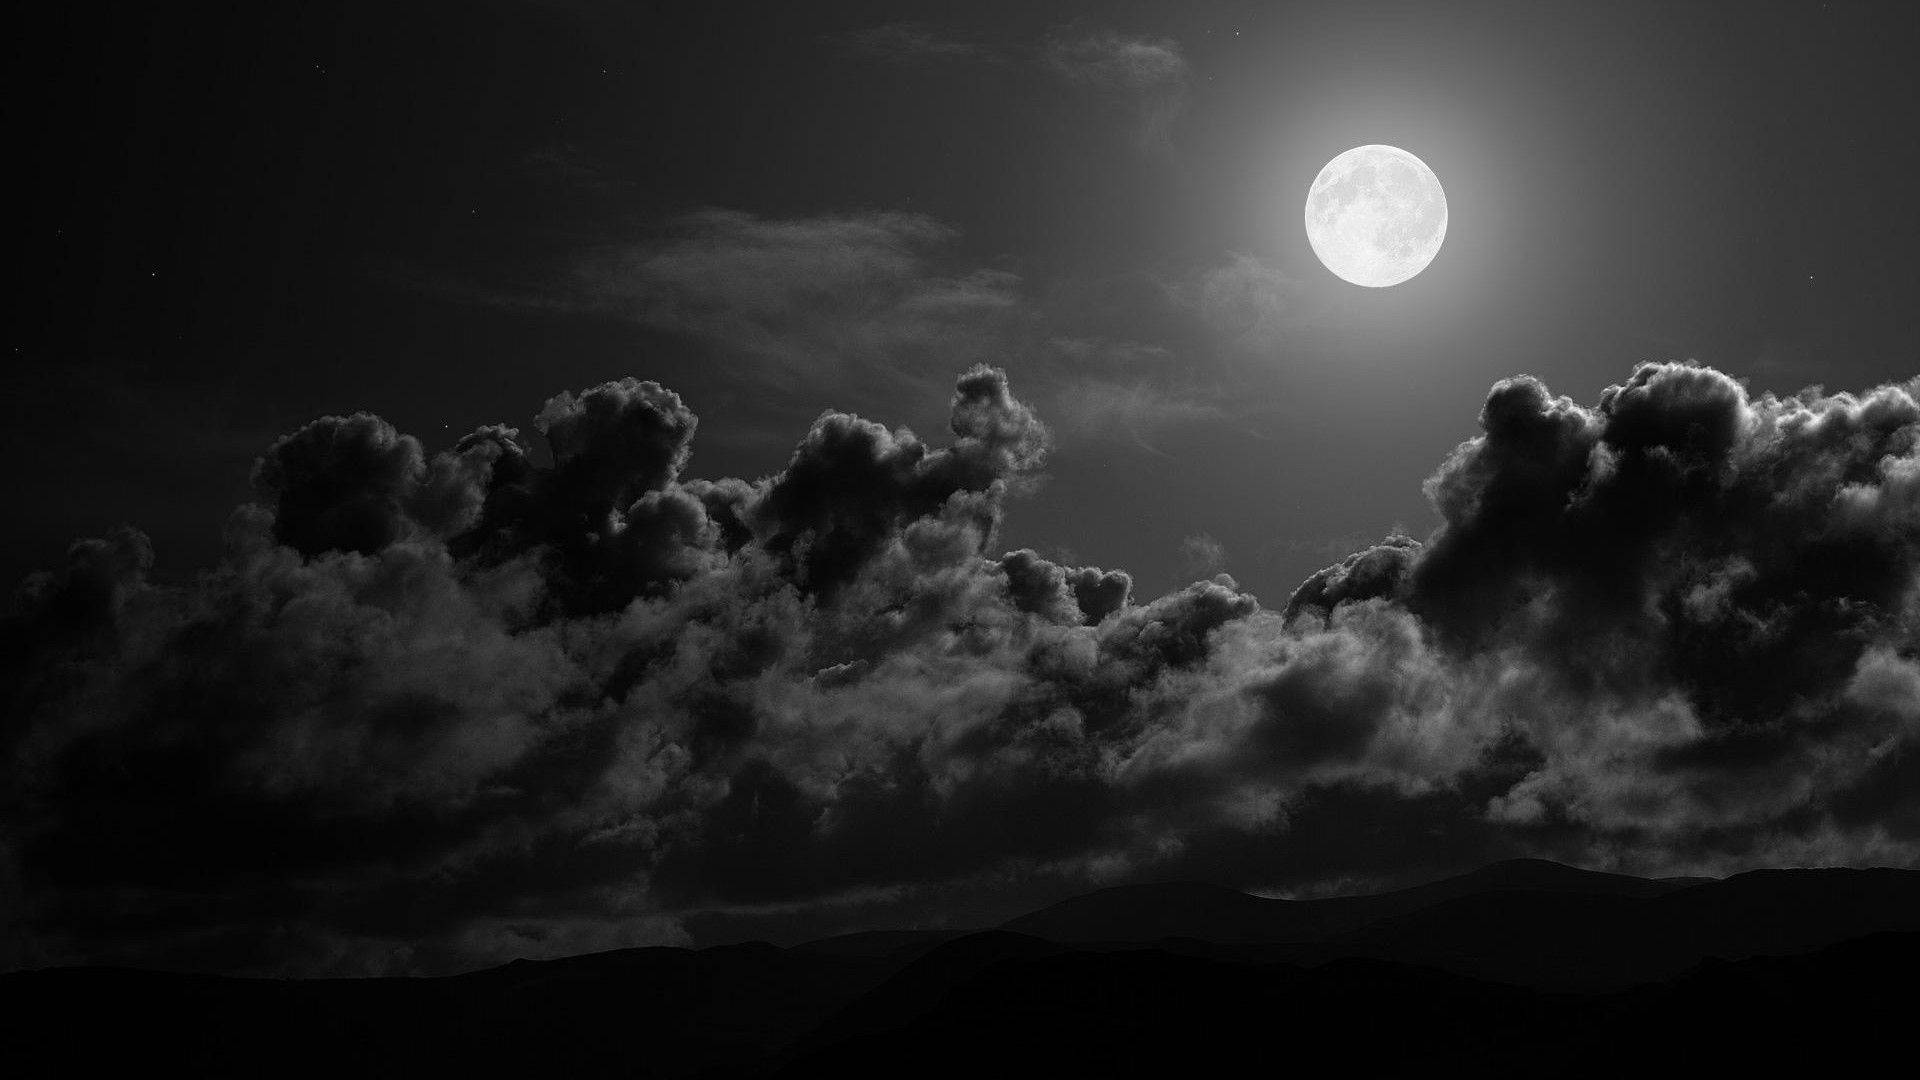 Black And White Aesthetic Full Moon On Cloudy Sky Wallpaper